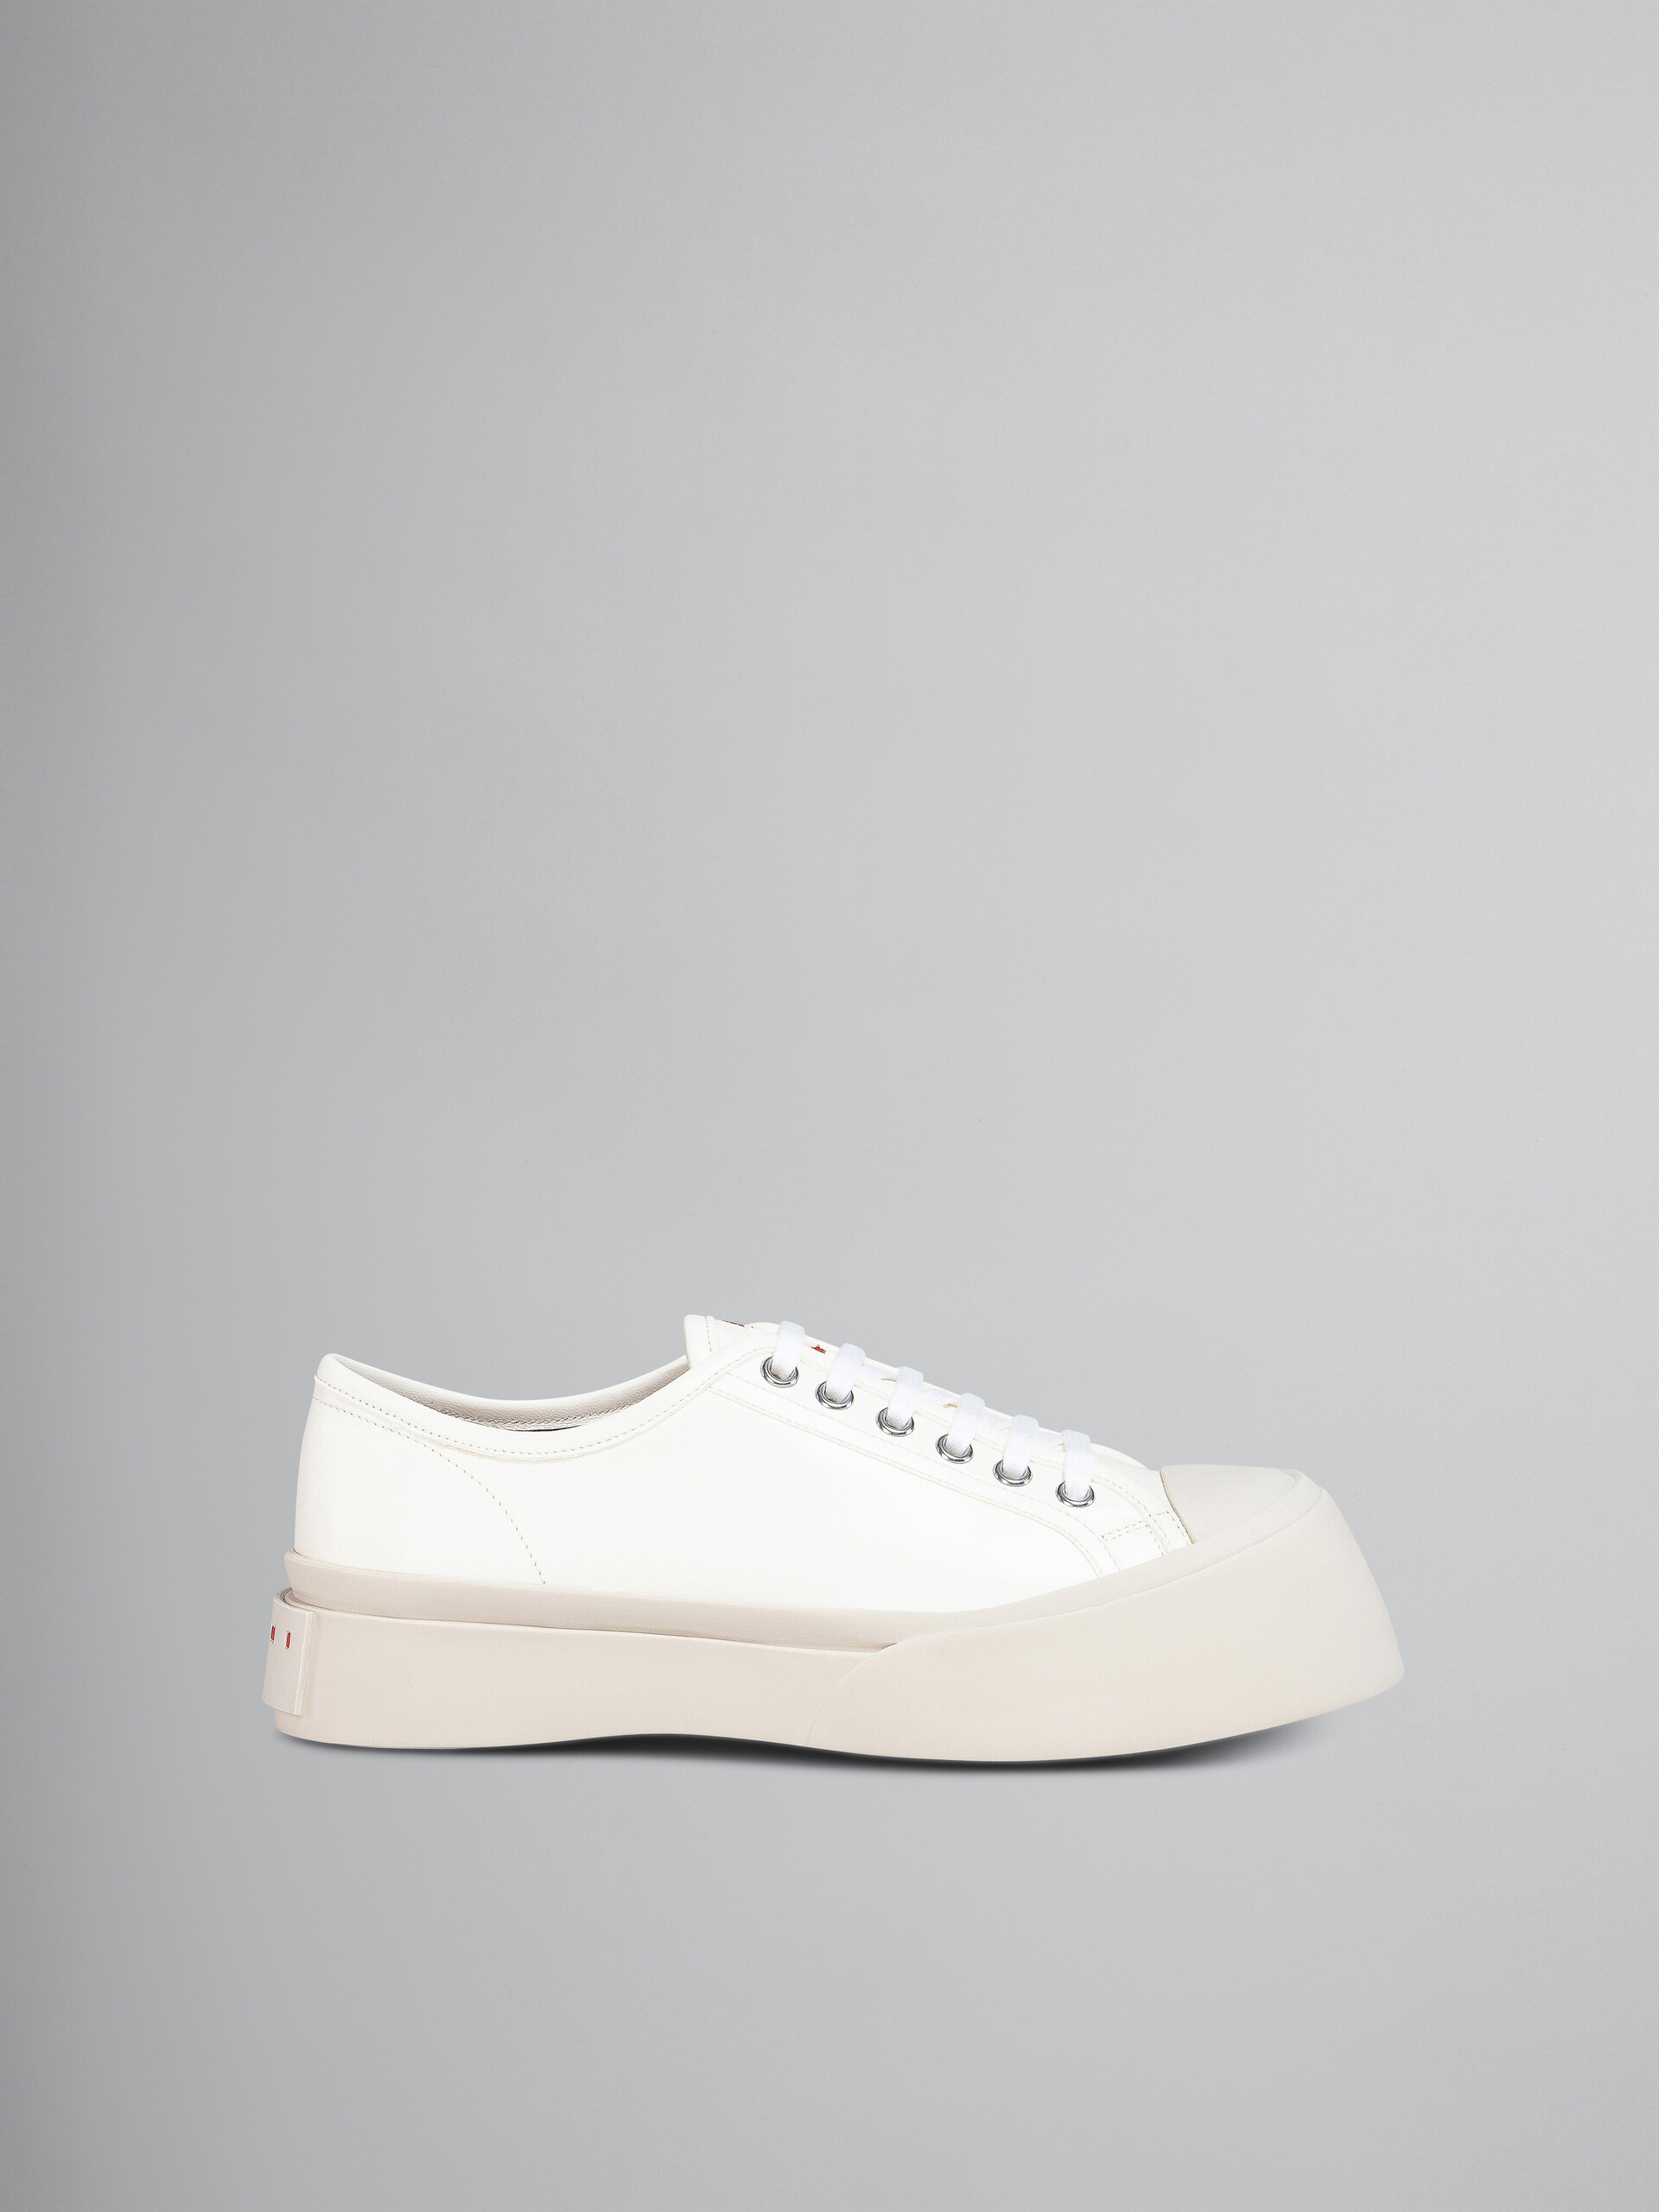 White leather Pablo lace-up sneaker - Sneakers - Image 1